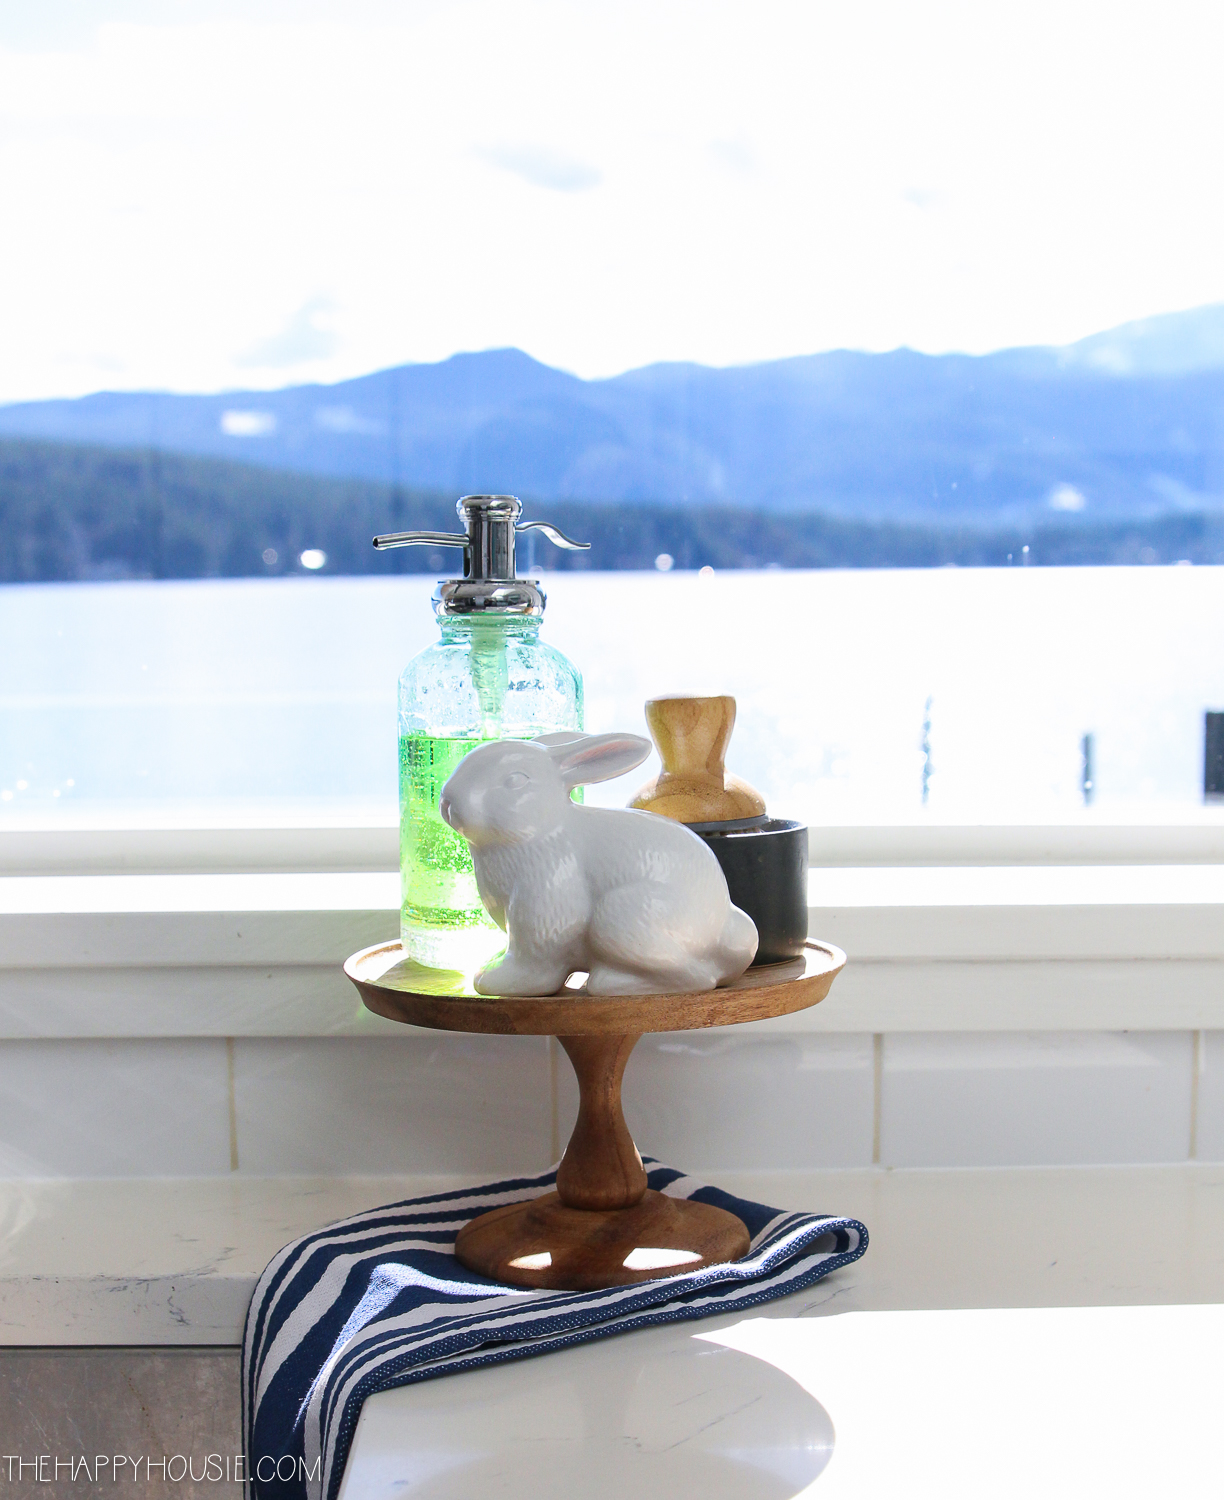 A wooden stand with a white bunny and dish soap by the sink.